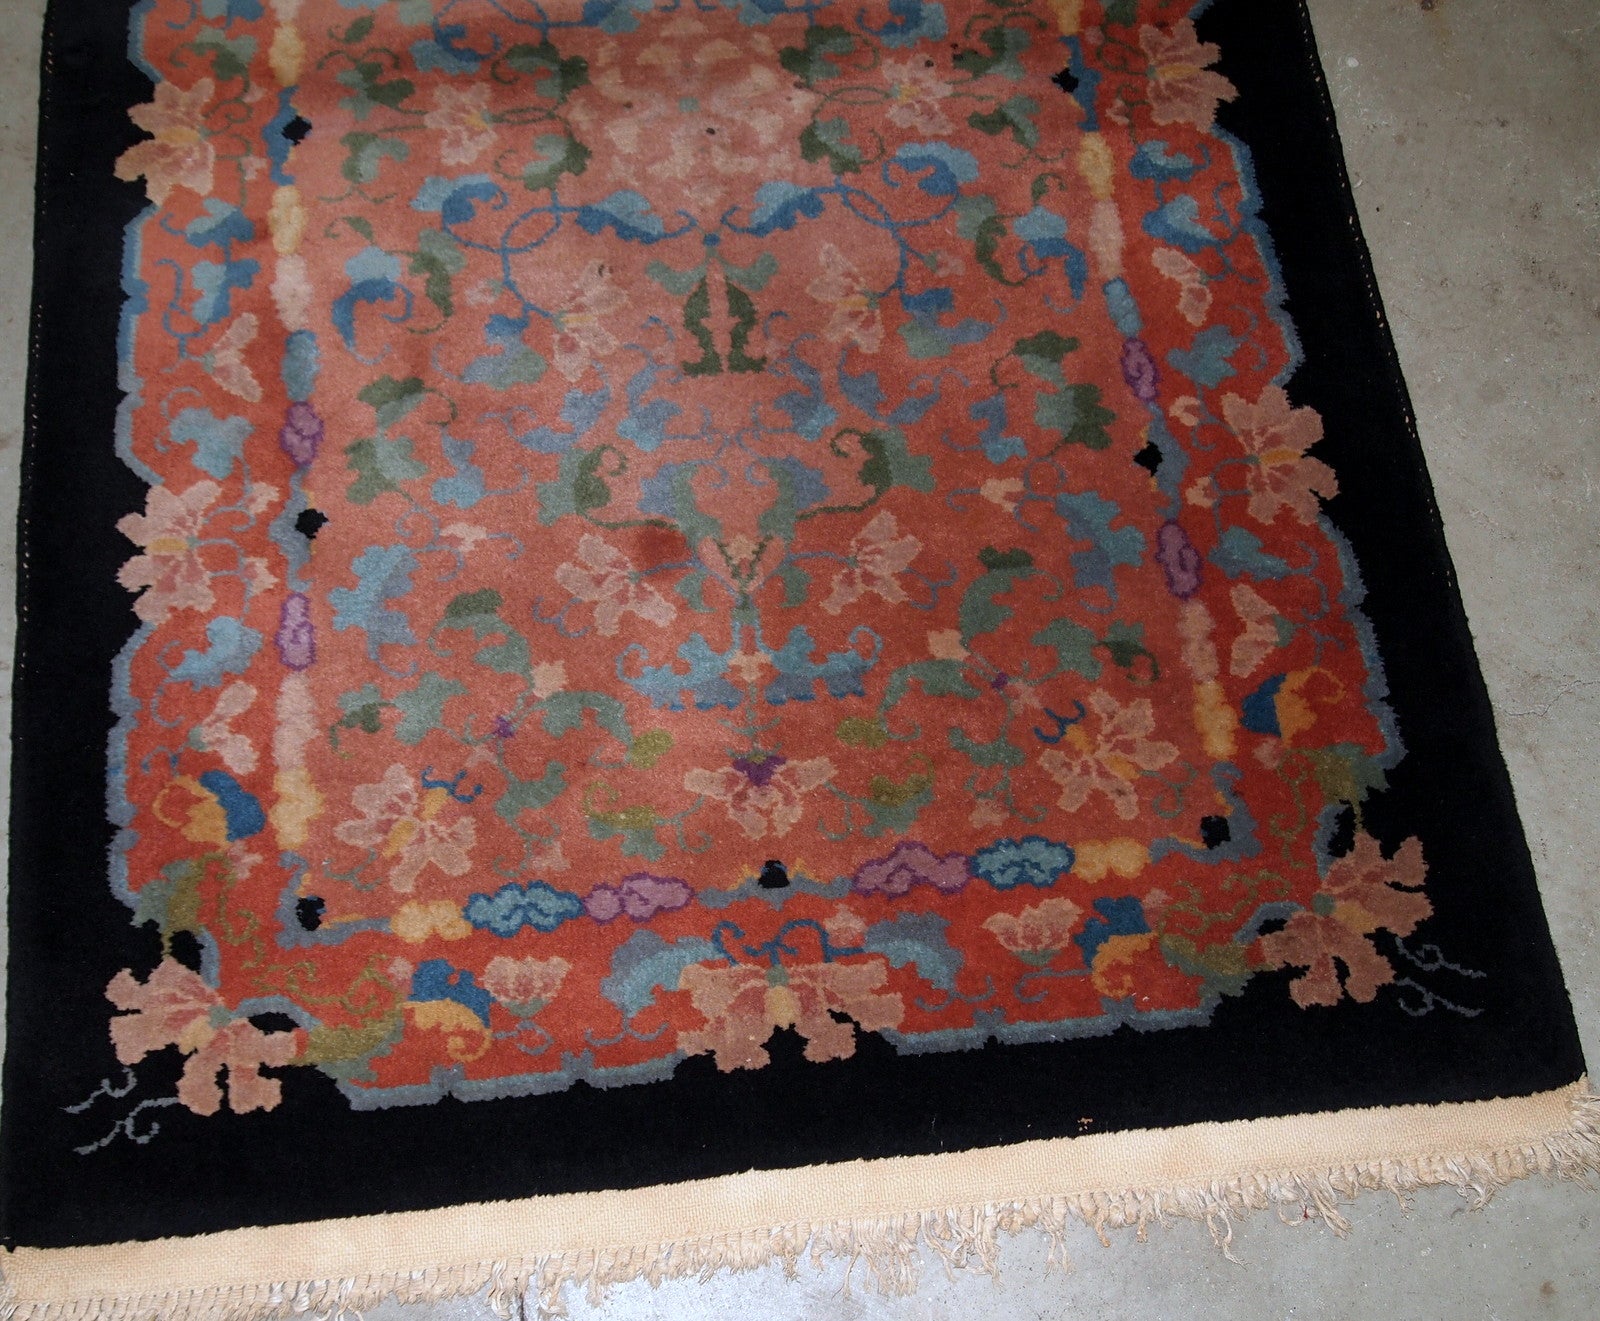 Antique Art Deco Chinese rug in unusual abstract design in  peach, sky blue, purple and egg shell shades. The rug is in original good condition.